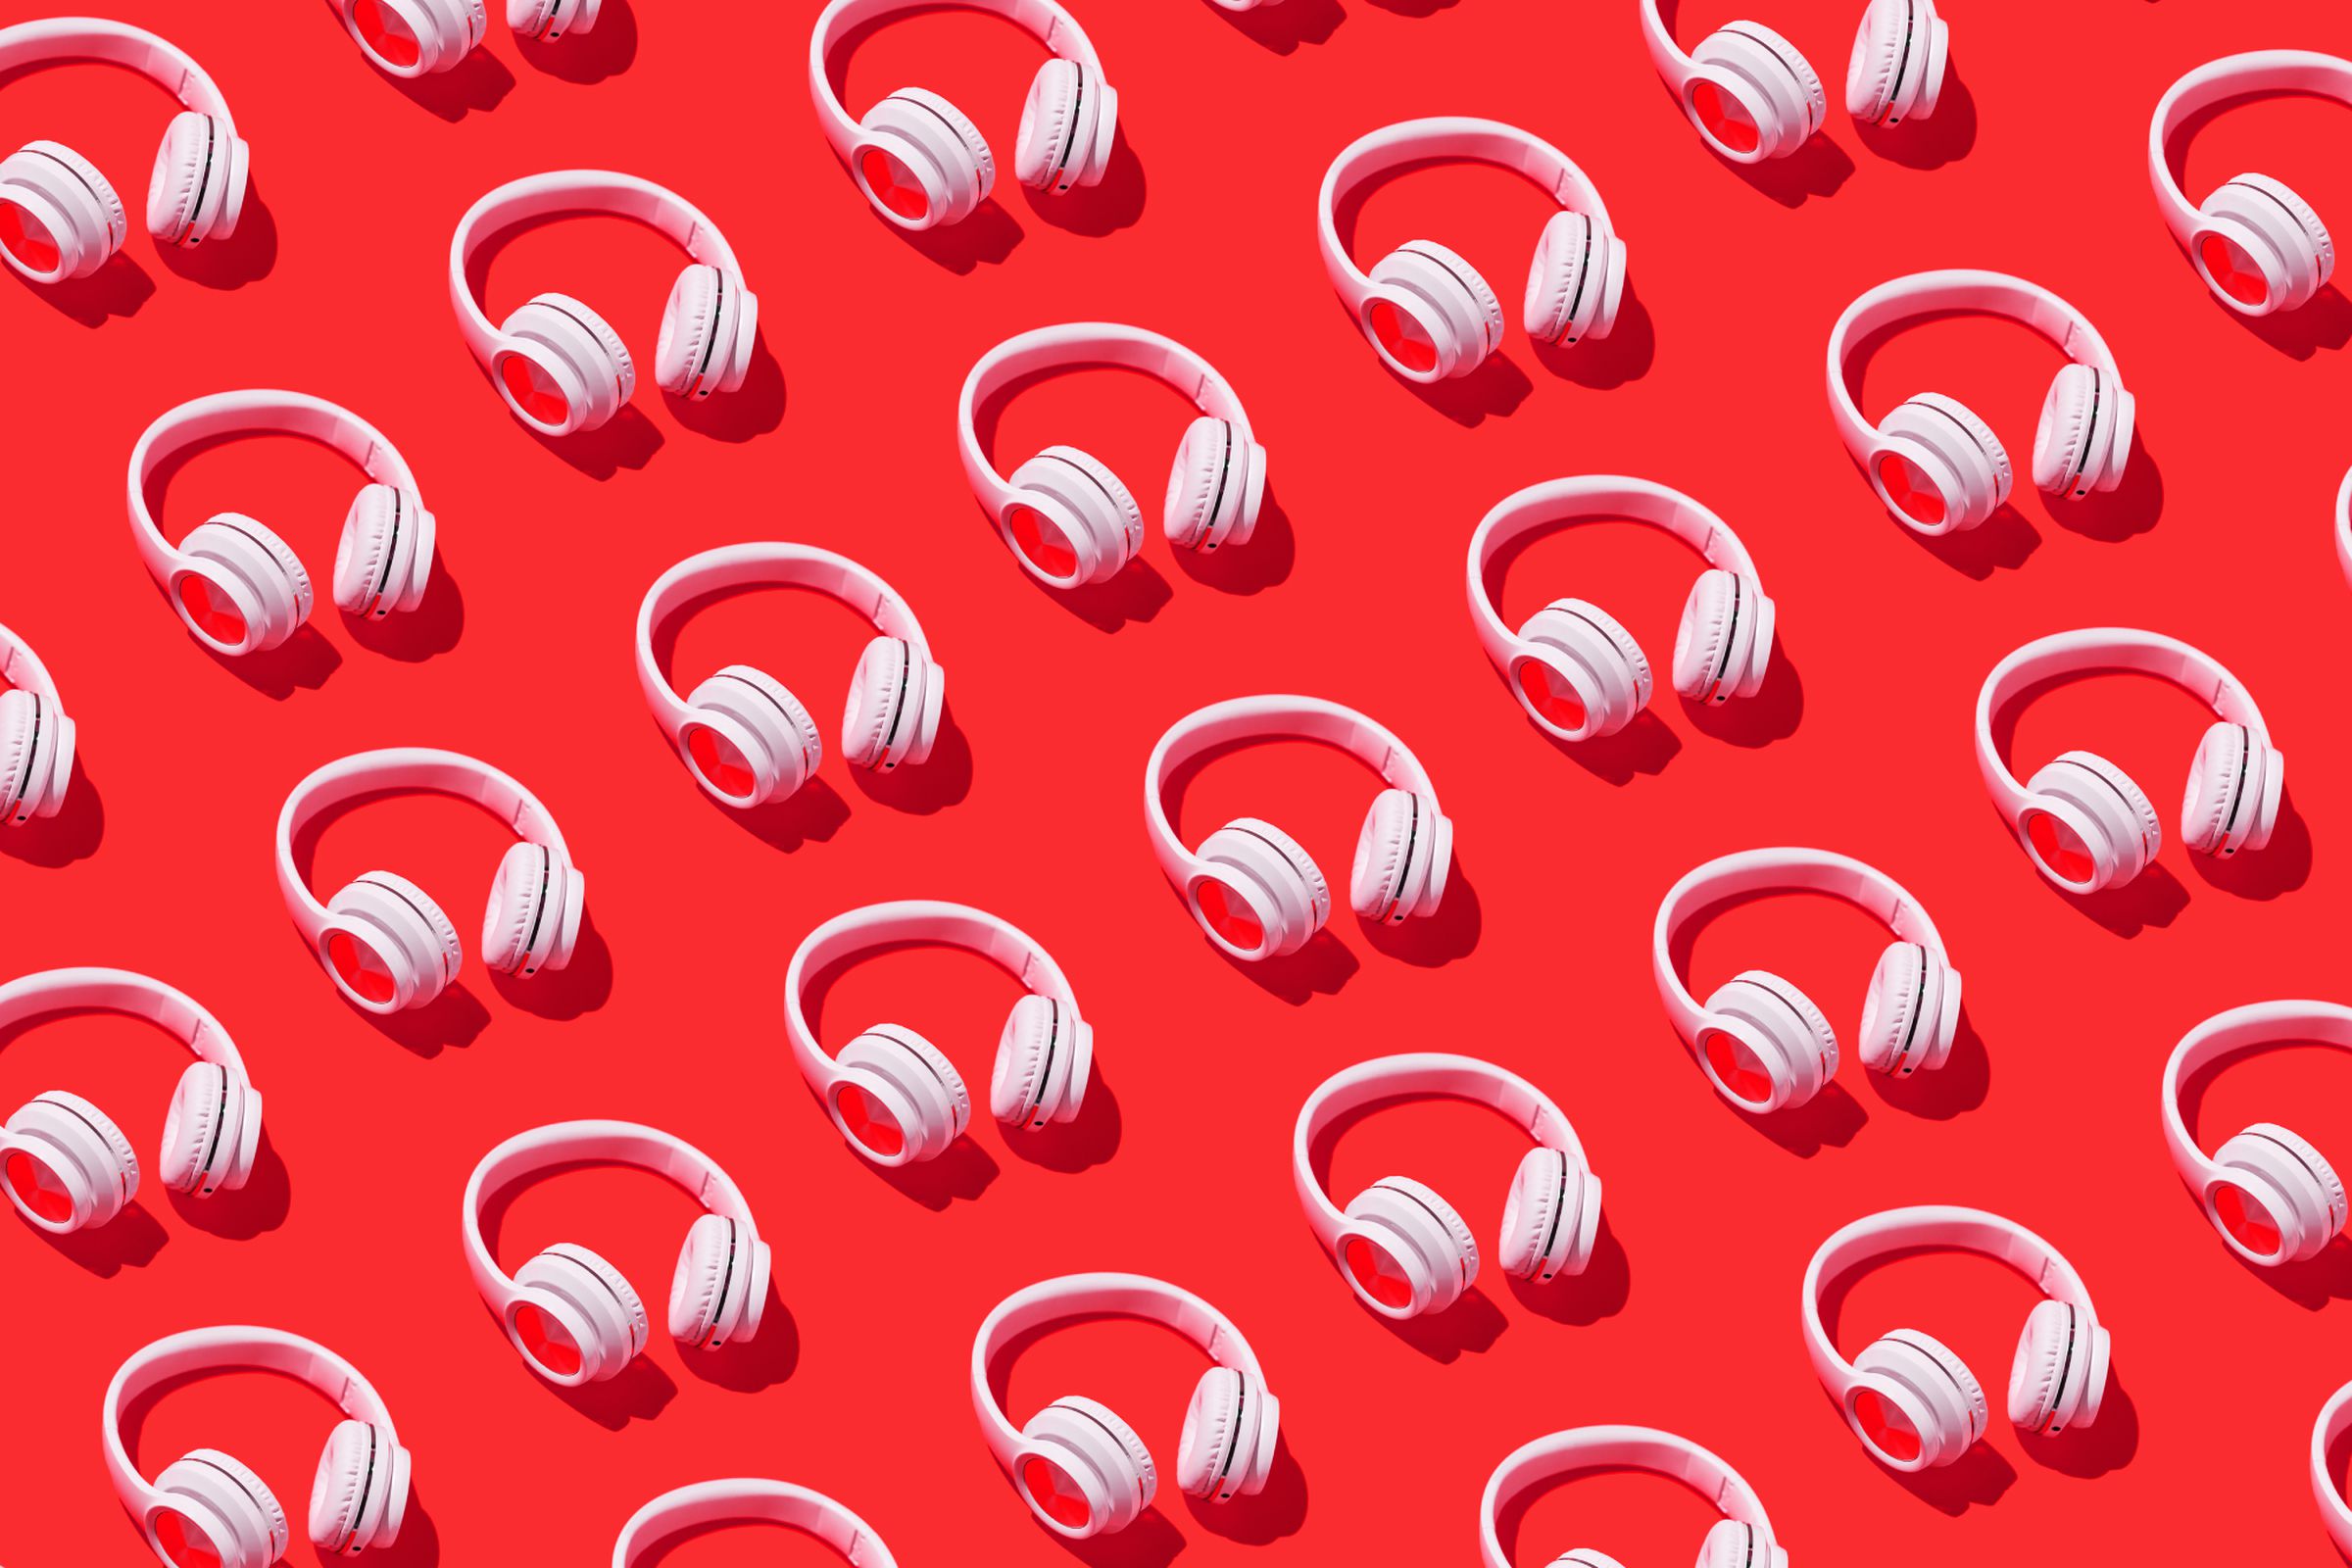 Red background with a repeating pattern of white headphones.